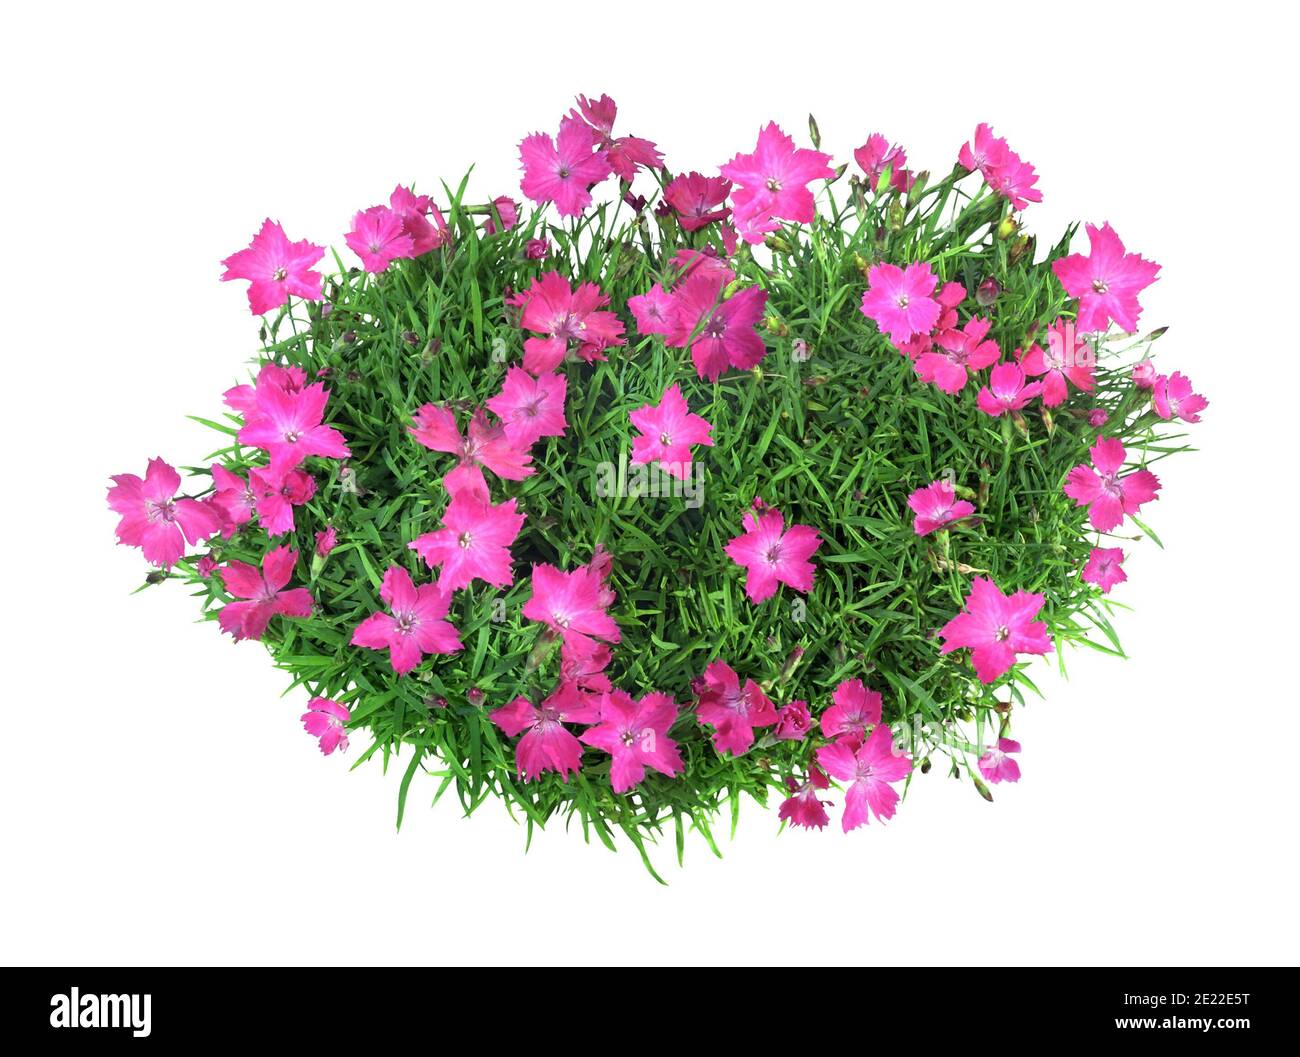 Bouquet of carnations in bloom, isolated on white background. Stock Photo